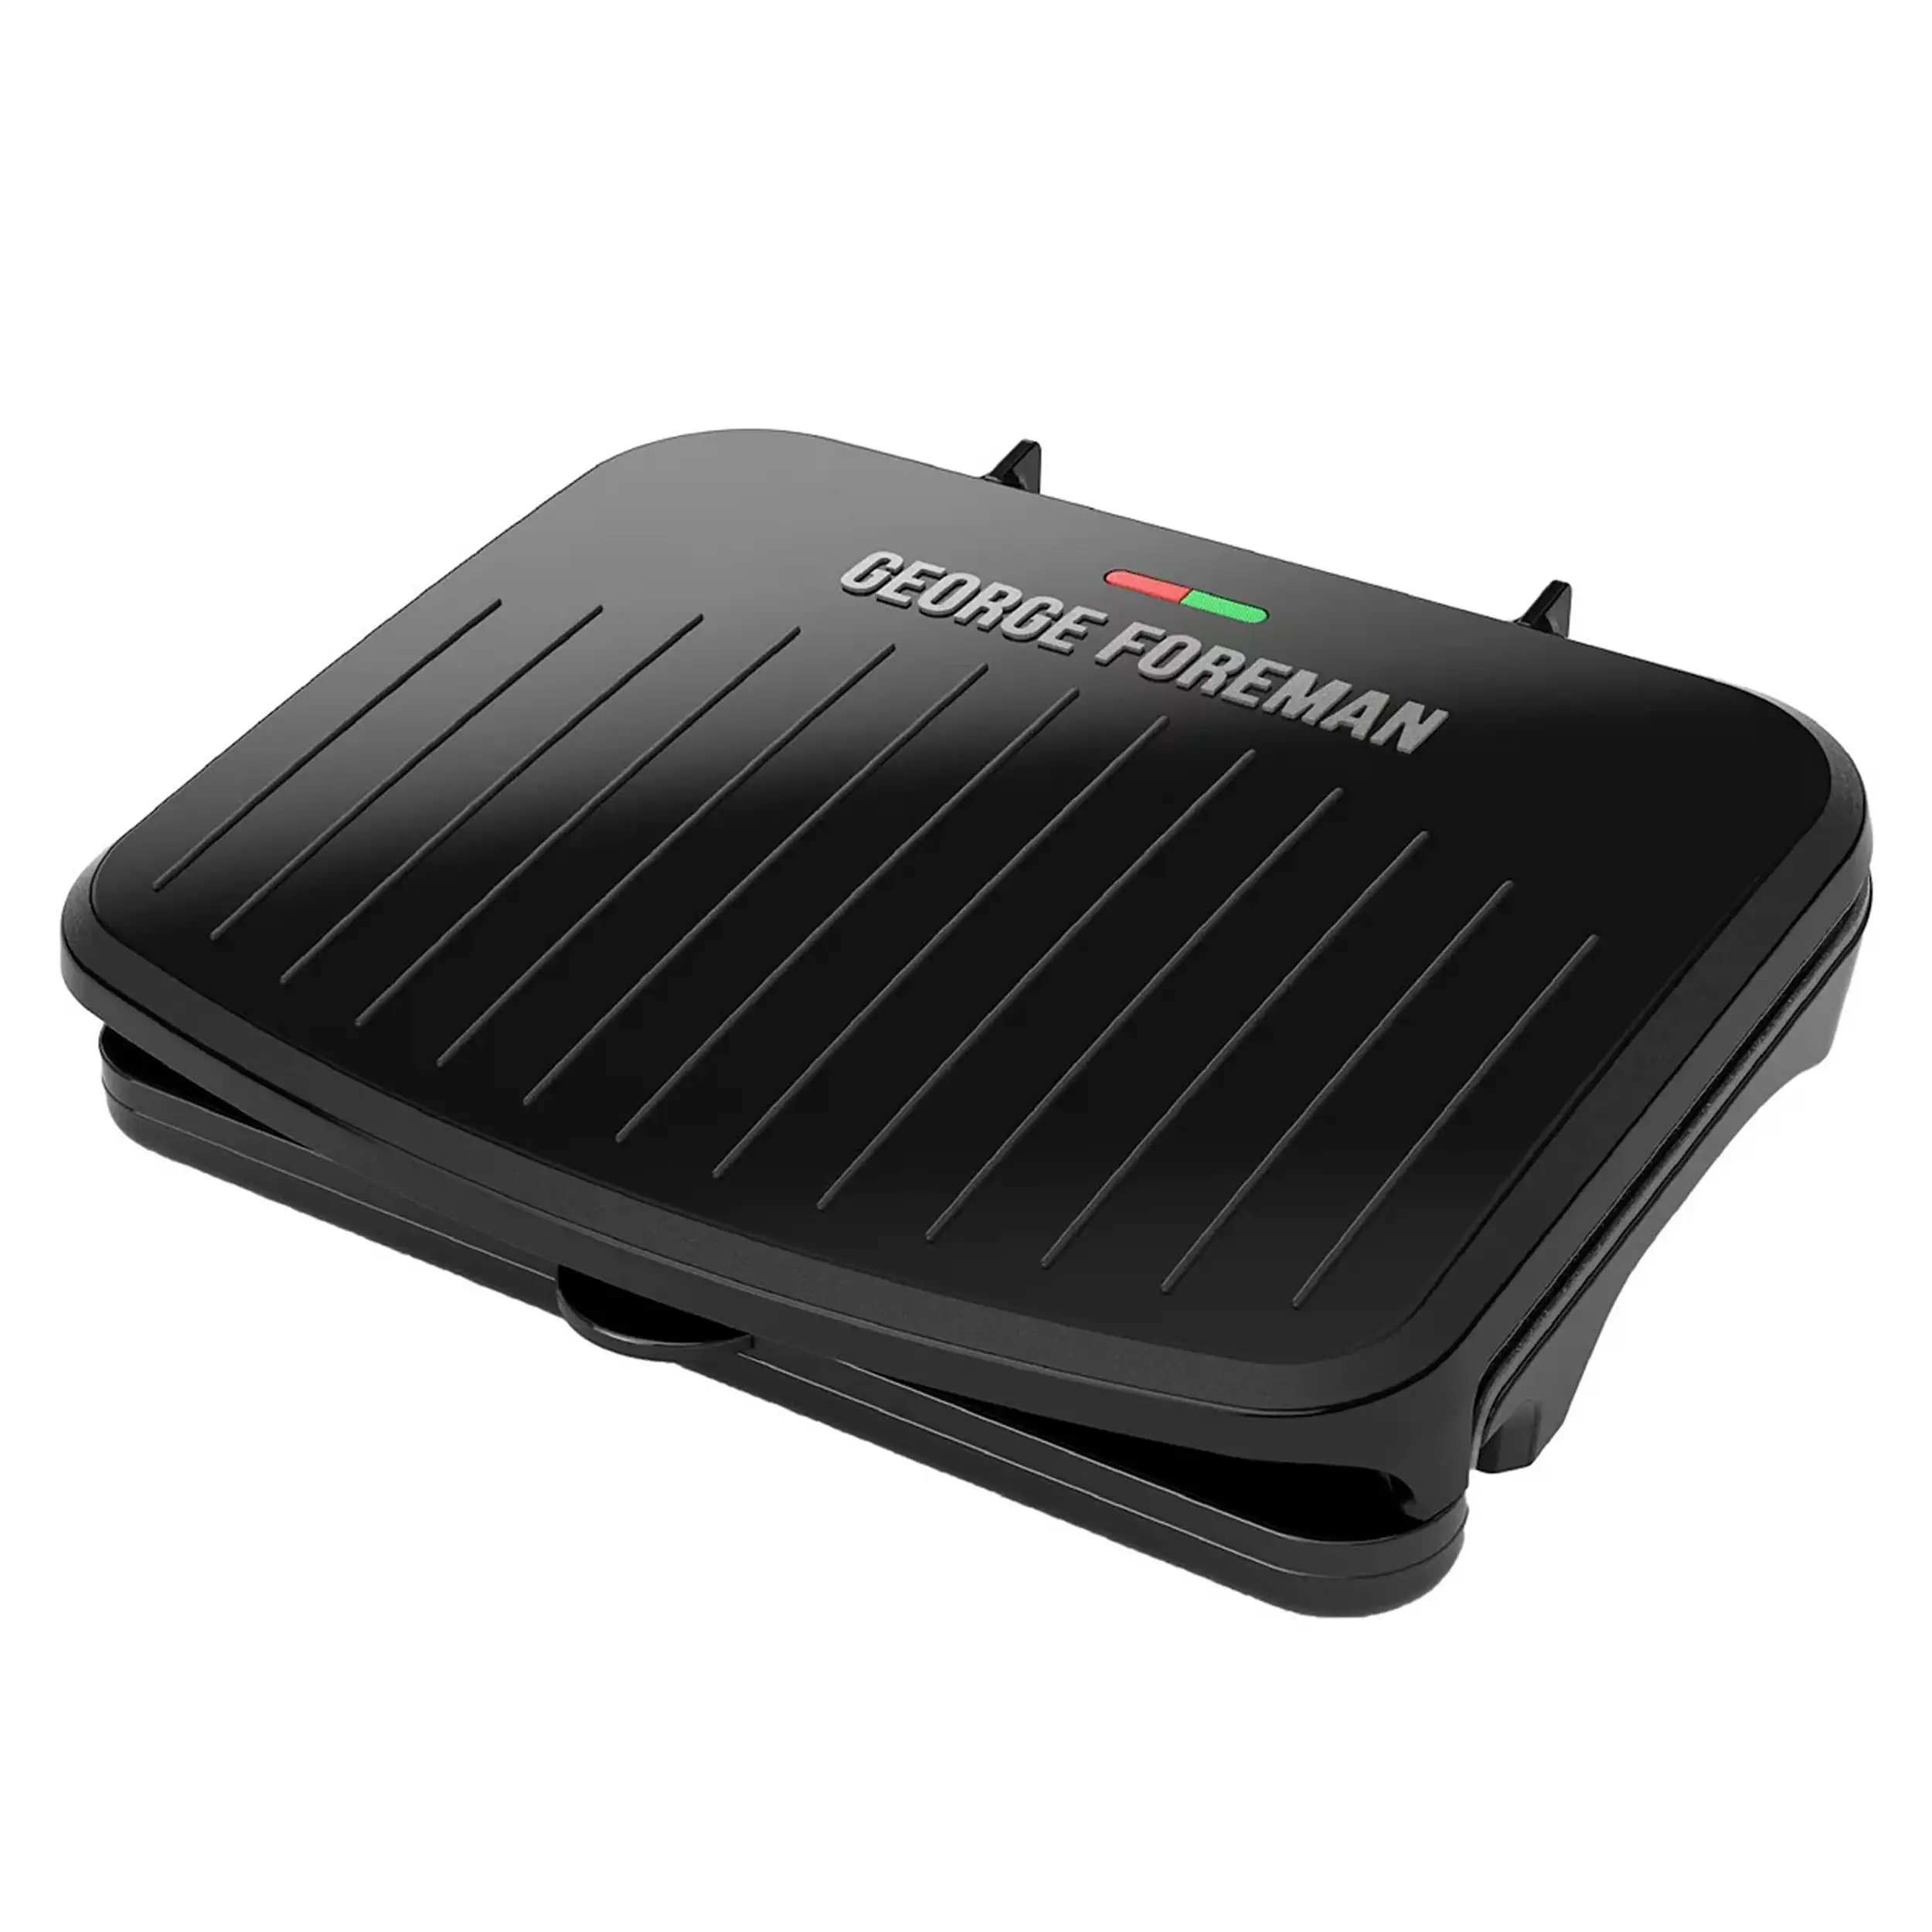 https://ae01.alicdn.com/kf/Se56fdb53b0eb47a8bdf2f234b64fc641r/George-Foreman-Family-Size-5-Serving-Nonstick-Compact-Electric-Indoor-Grill-in-Black-Smokeless-Grill.jpg